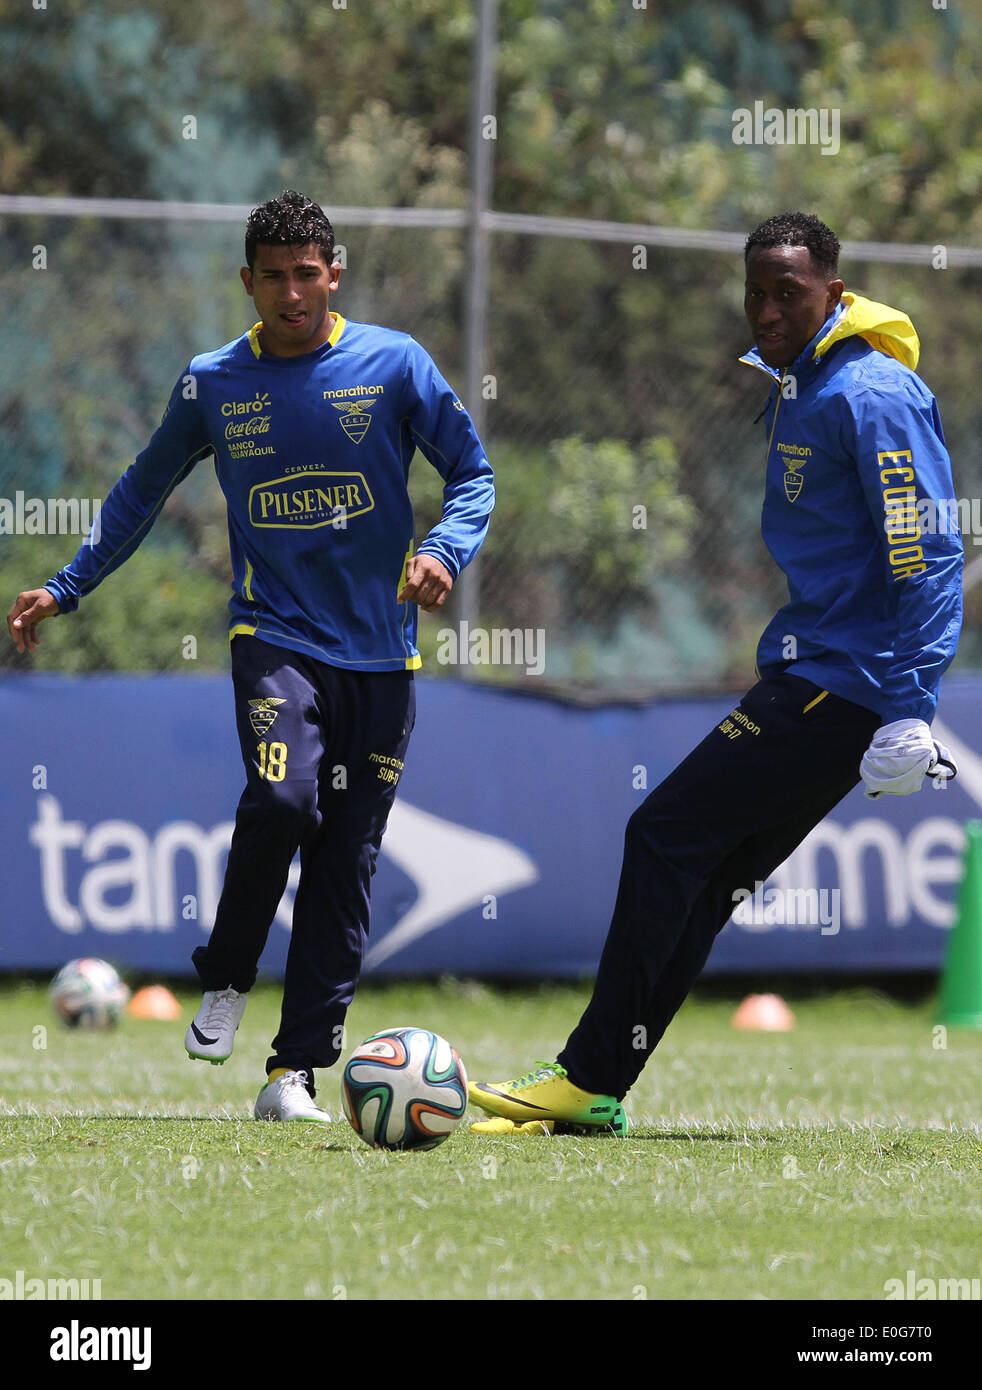 Quito, Ecuador. 12th May, 2014. Ecuador's national soccer team players Joao Rojas (L) and Jaime Ayovi take part in a training session, at the House of the National Team, in Quito, capital of Ecuador, on May 12, 2014. Ecuador's national soccer team players are preparing for the friendly match against the Netherlands, before the 2014 Brazil World Cup. © Santiago Armas/Xinhua/Alamy Live News Stock Photo